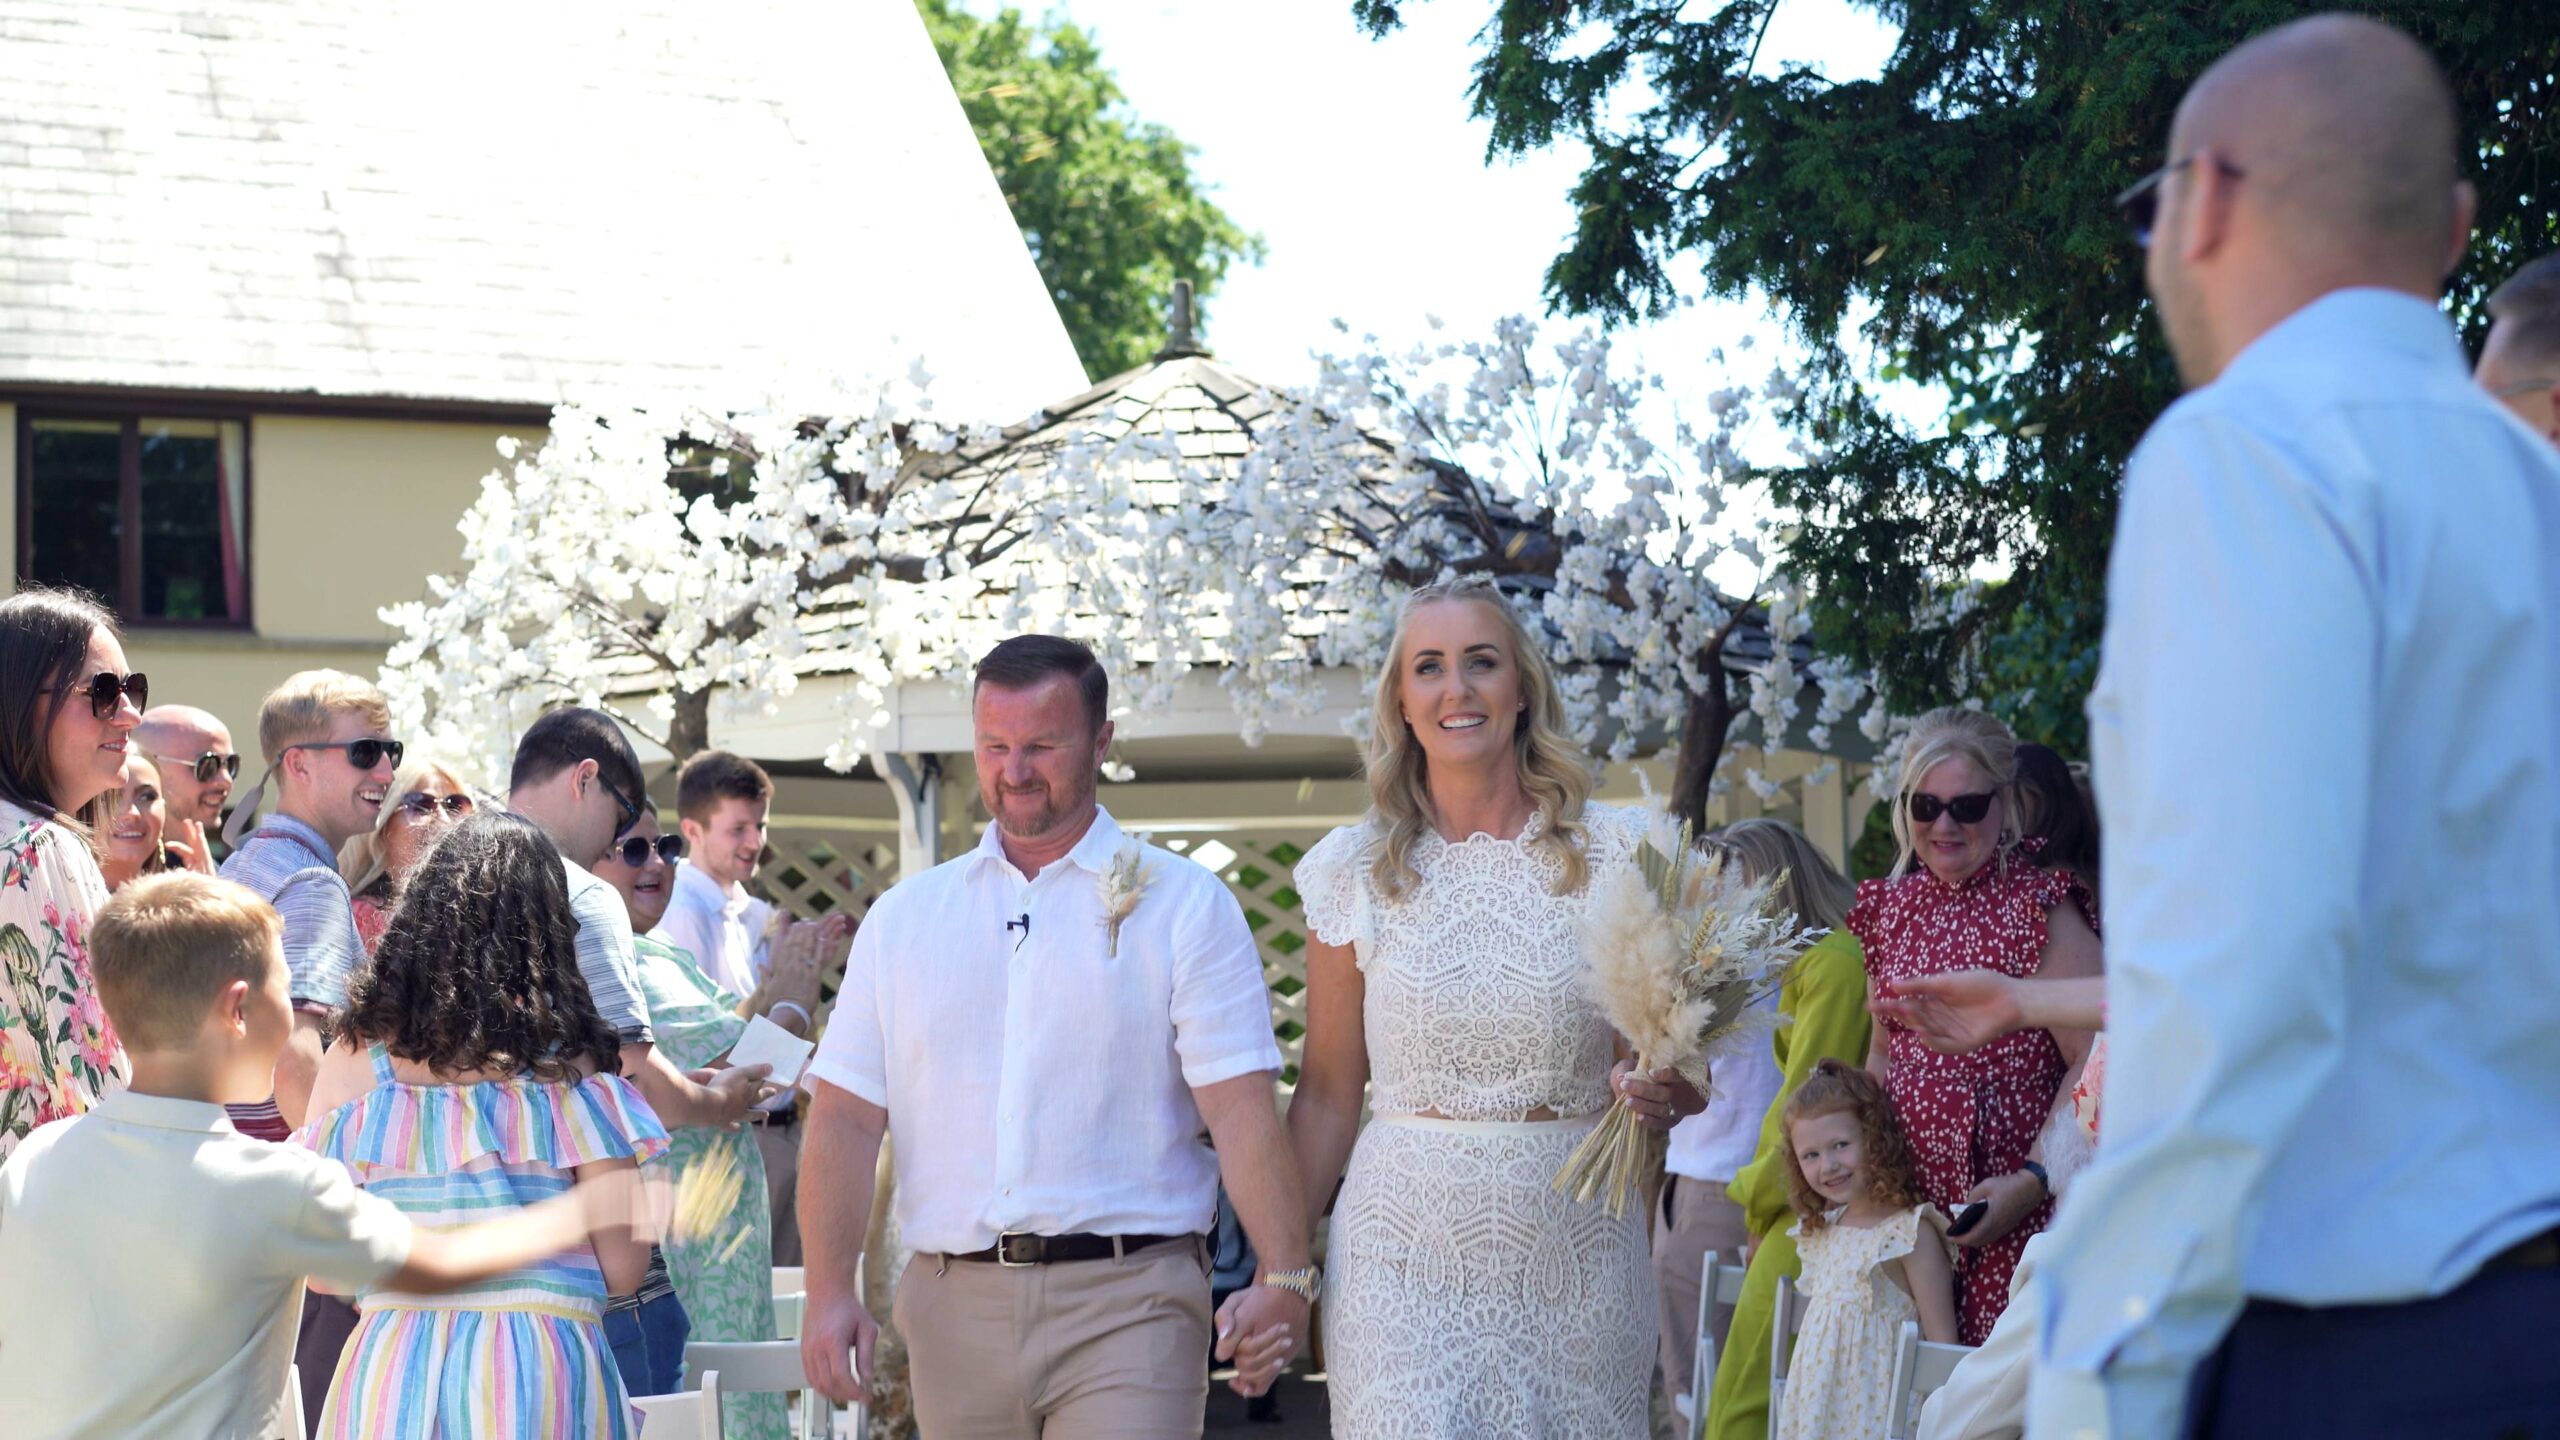 guests throw confetti at the couple after their 10 year vow renewal